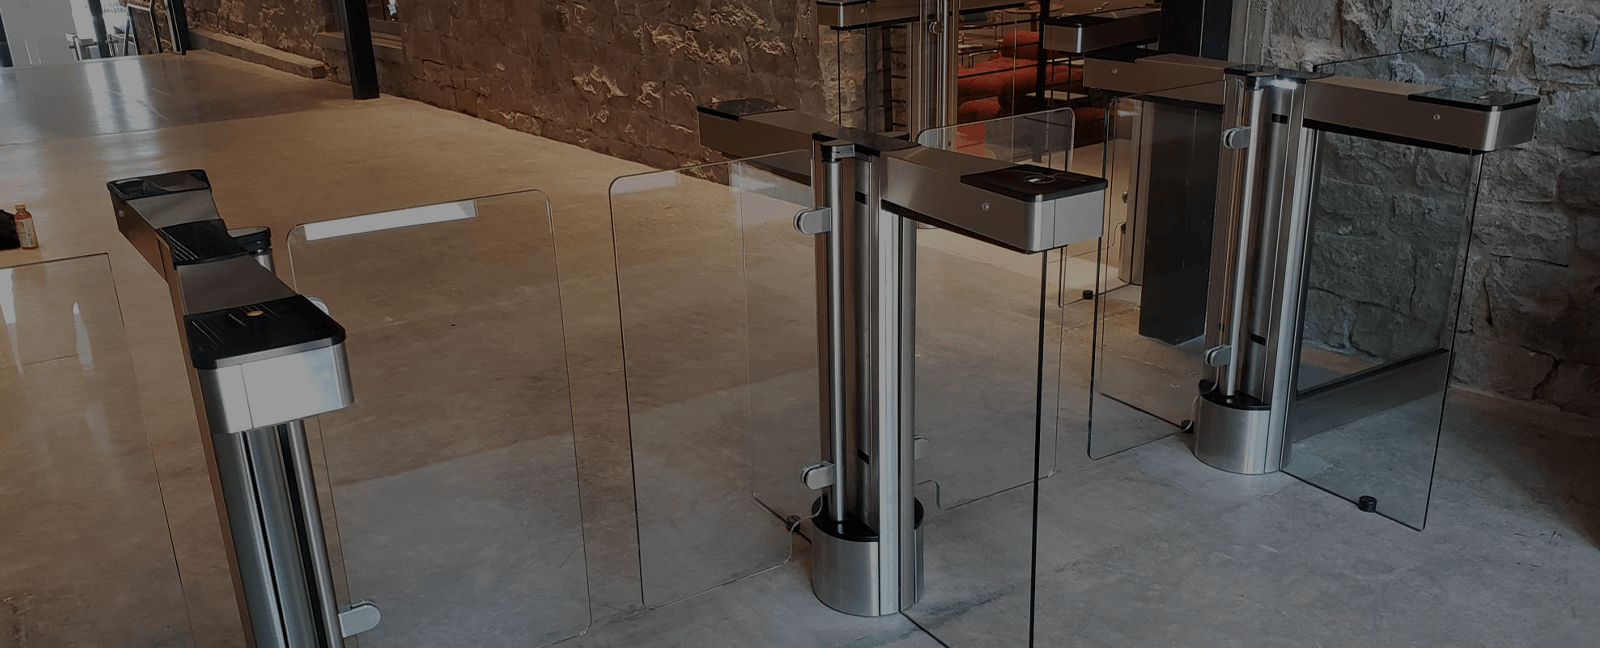 How Much Does a Turnstile Cost?